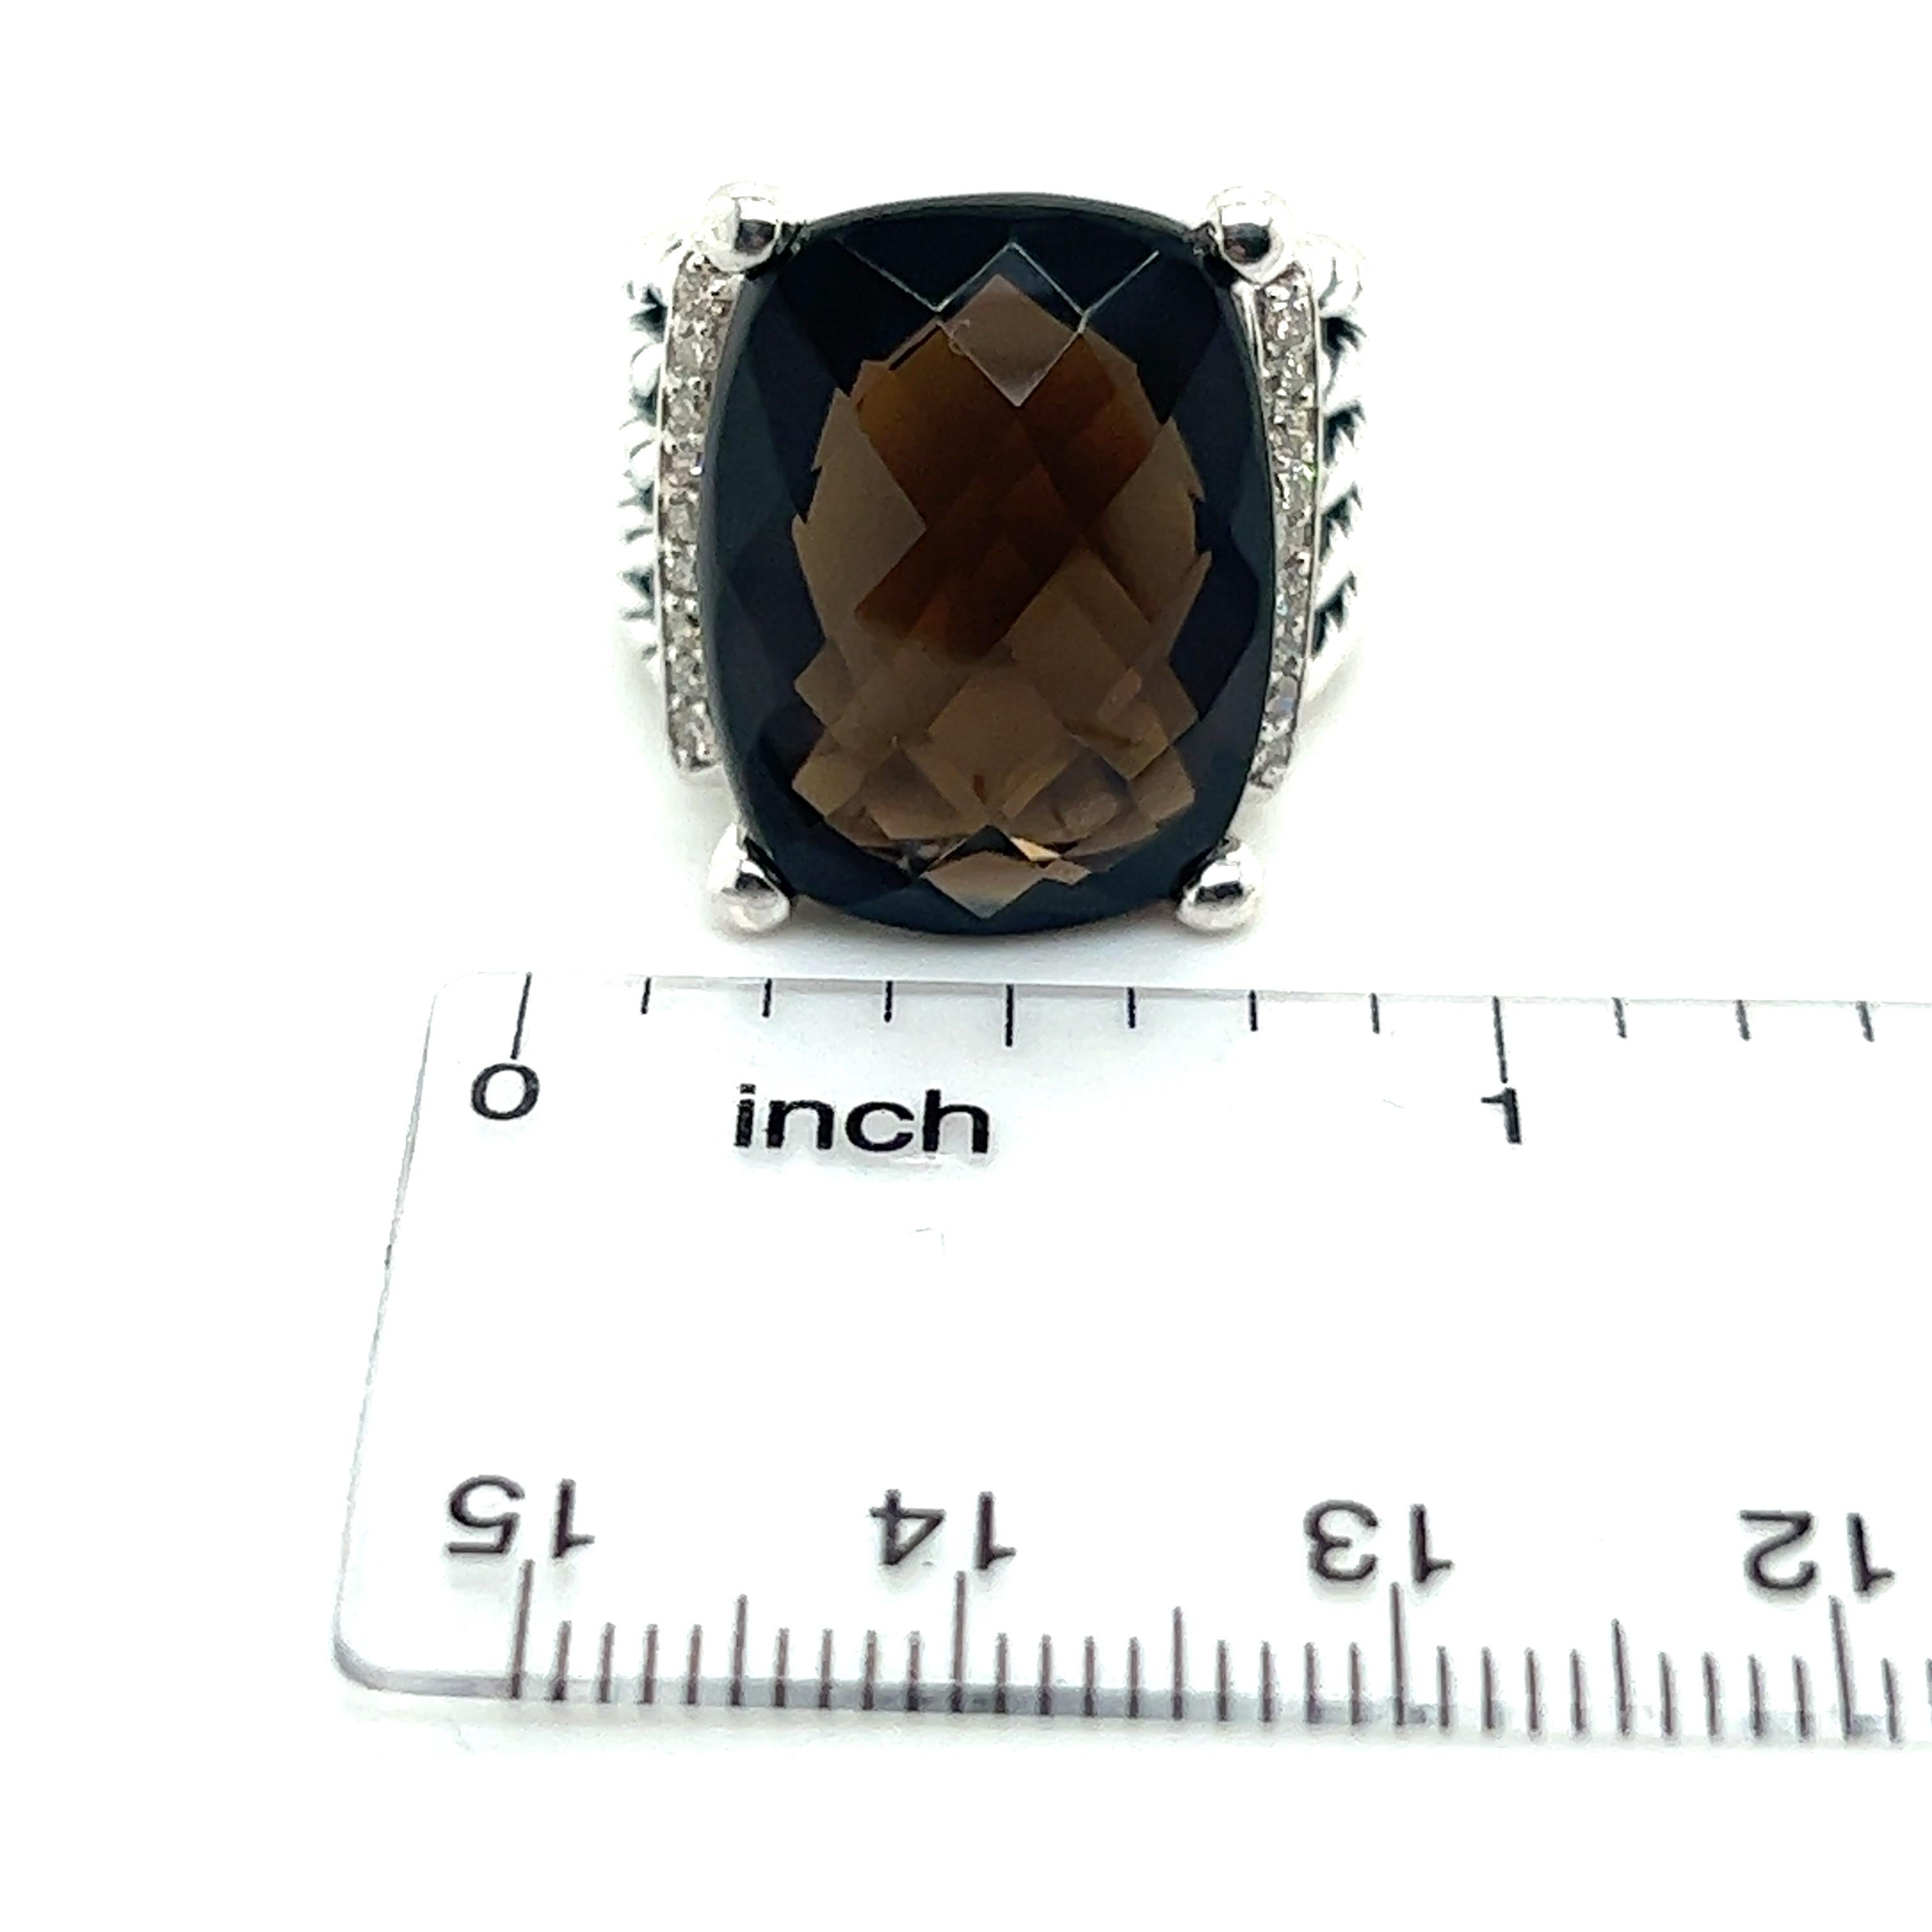 Authentic David Yurman Estate Wheaton Smoky Quartz Pave Diamond Ring Size 7 Silver 20 x 15 mm DY241

Retail: $1,599.00

This elegant Authentic David Yurman ring is made of sterling silver.

TRUSTED SELLER SINCE 2002

PLEASE SEE OUR HUNDREDS OF